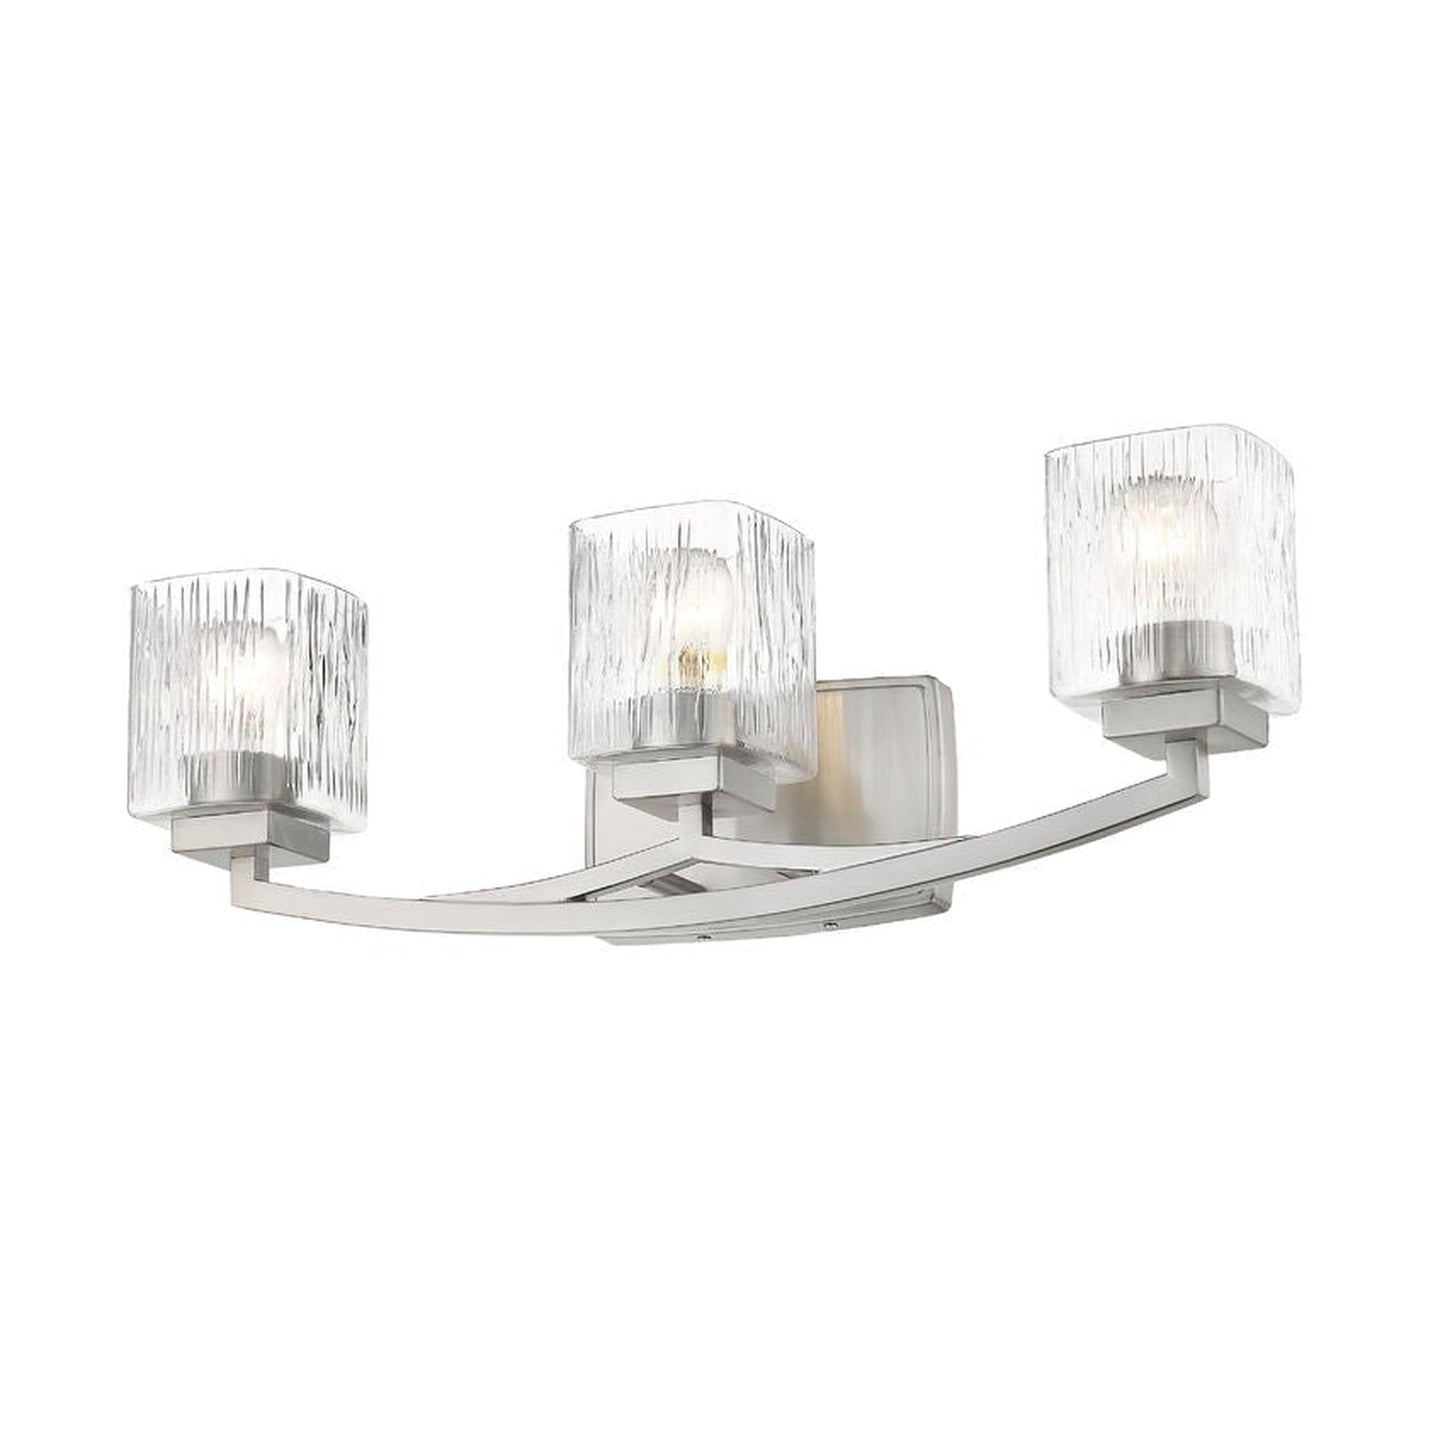 Z-Lite Zaid 24" 3-Light Brushed Nickel Vanity Light With Chisel Glass Shade